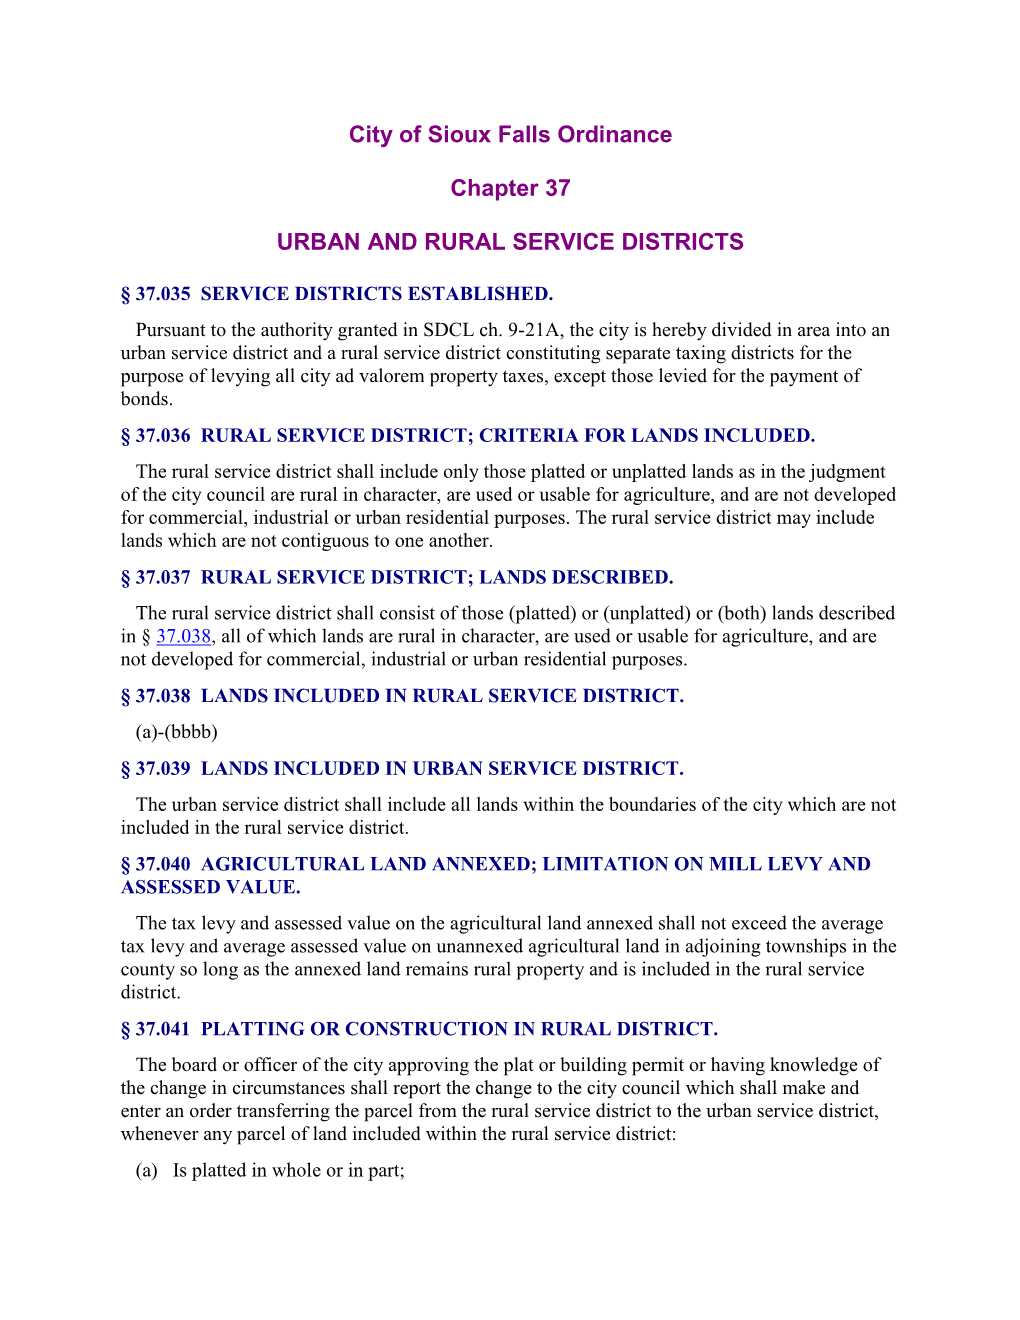 City of Sioux Falls Ordinance Chapter 37 URBAN and RURAL SERVICE